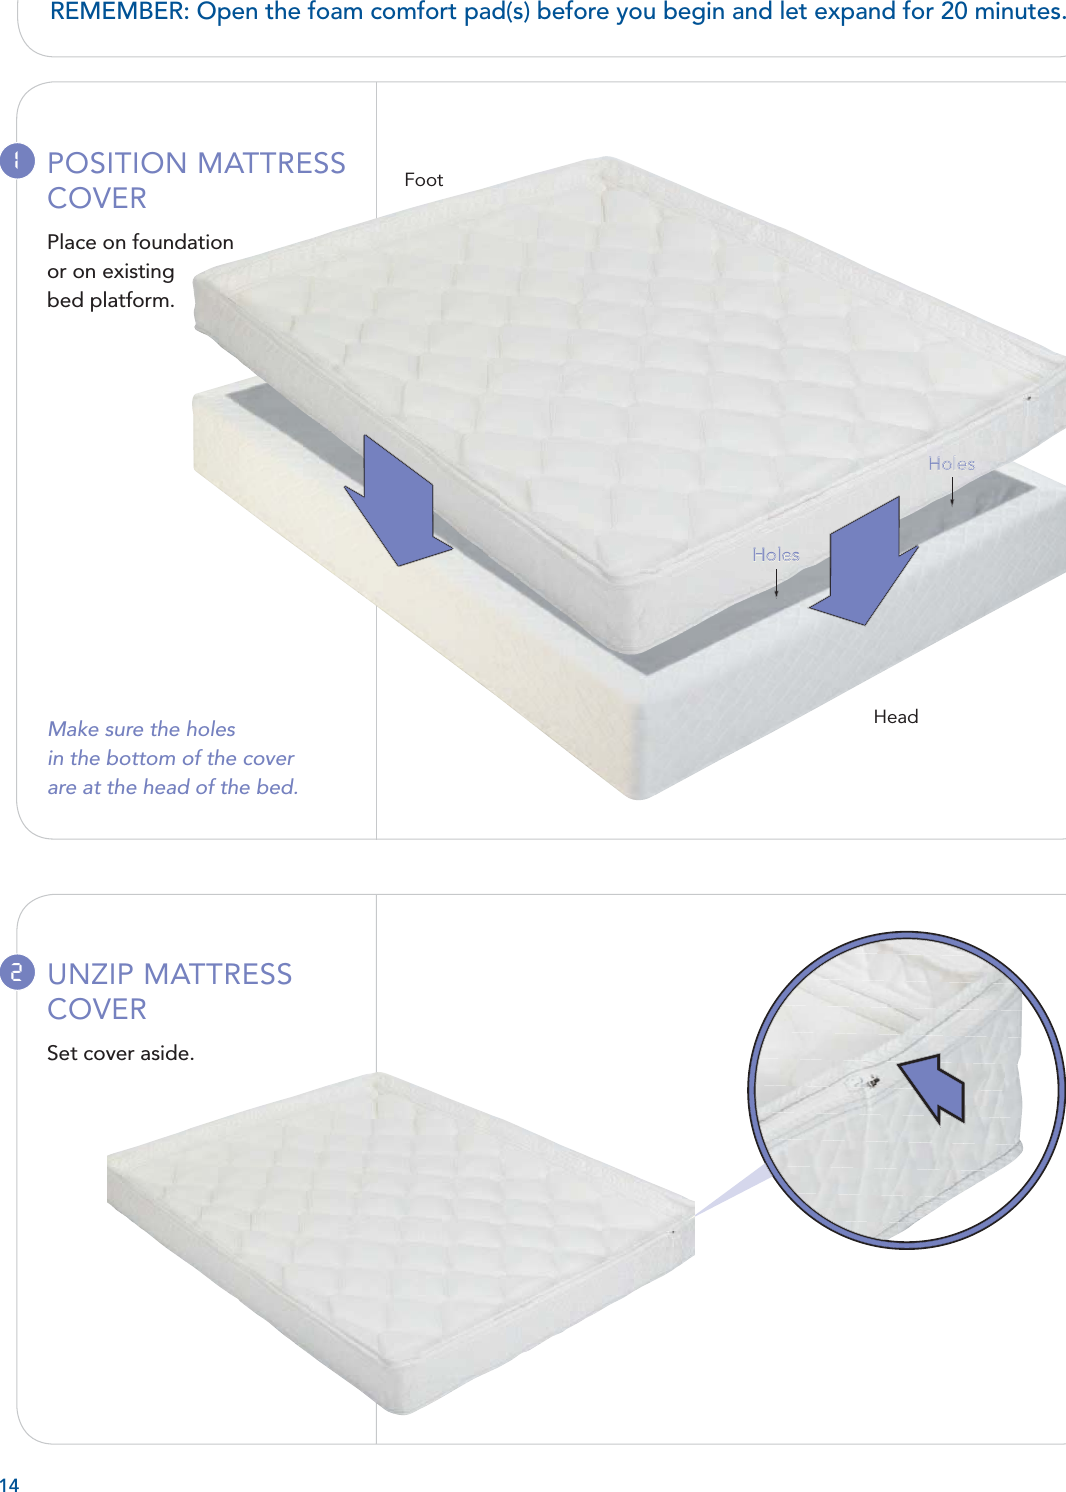 12UNZIP MATTRESS COVERSet cover aside.14POSITION MATTRESS COVERPlace on foundationor on existingbed platform.Make sure the holes in the bottom of the cover are at the head of the bed.)PMFT)PMFTREMEMBER: Open the foam comfort pad(s) before you begin and let expand for 20 minutes.FootHead